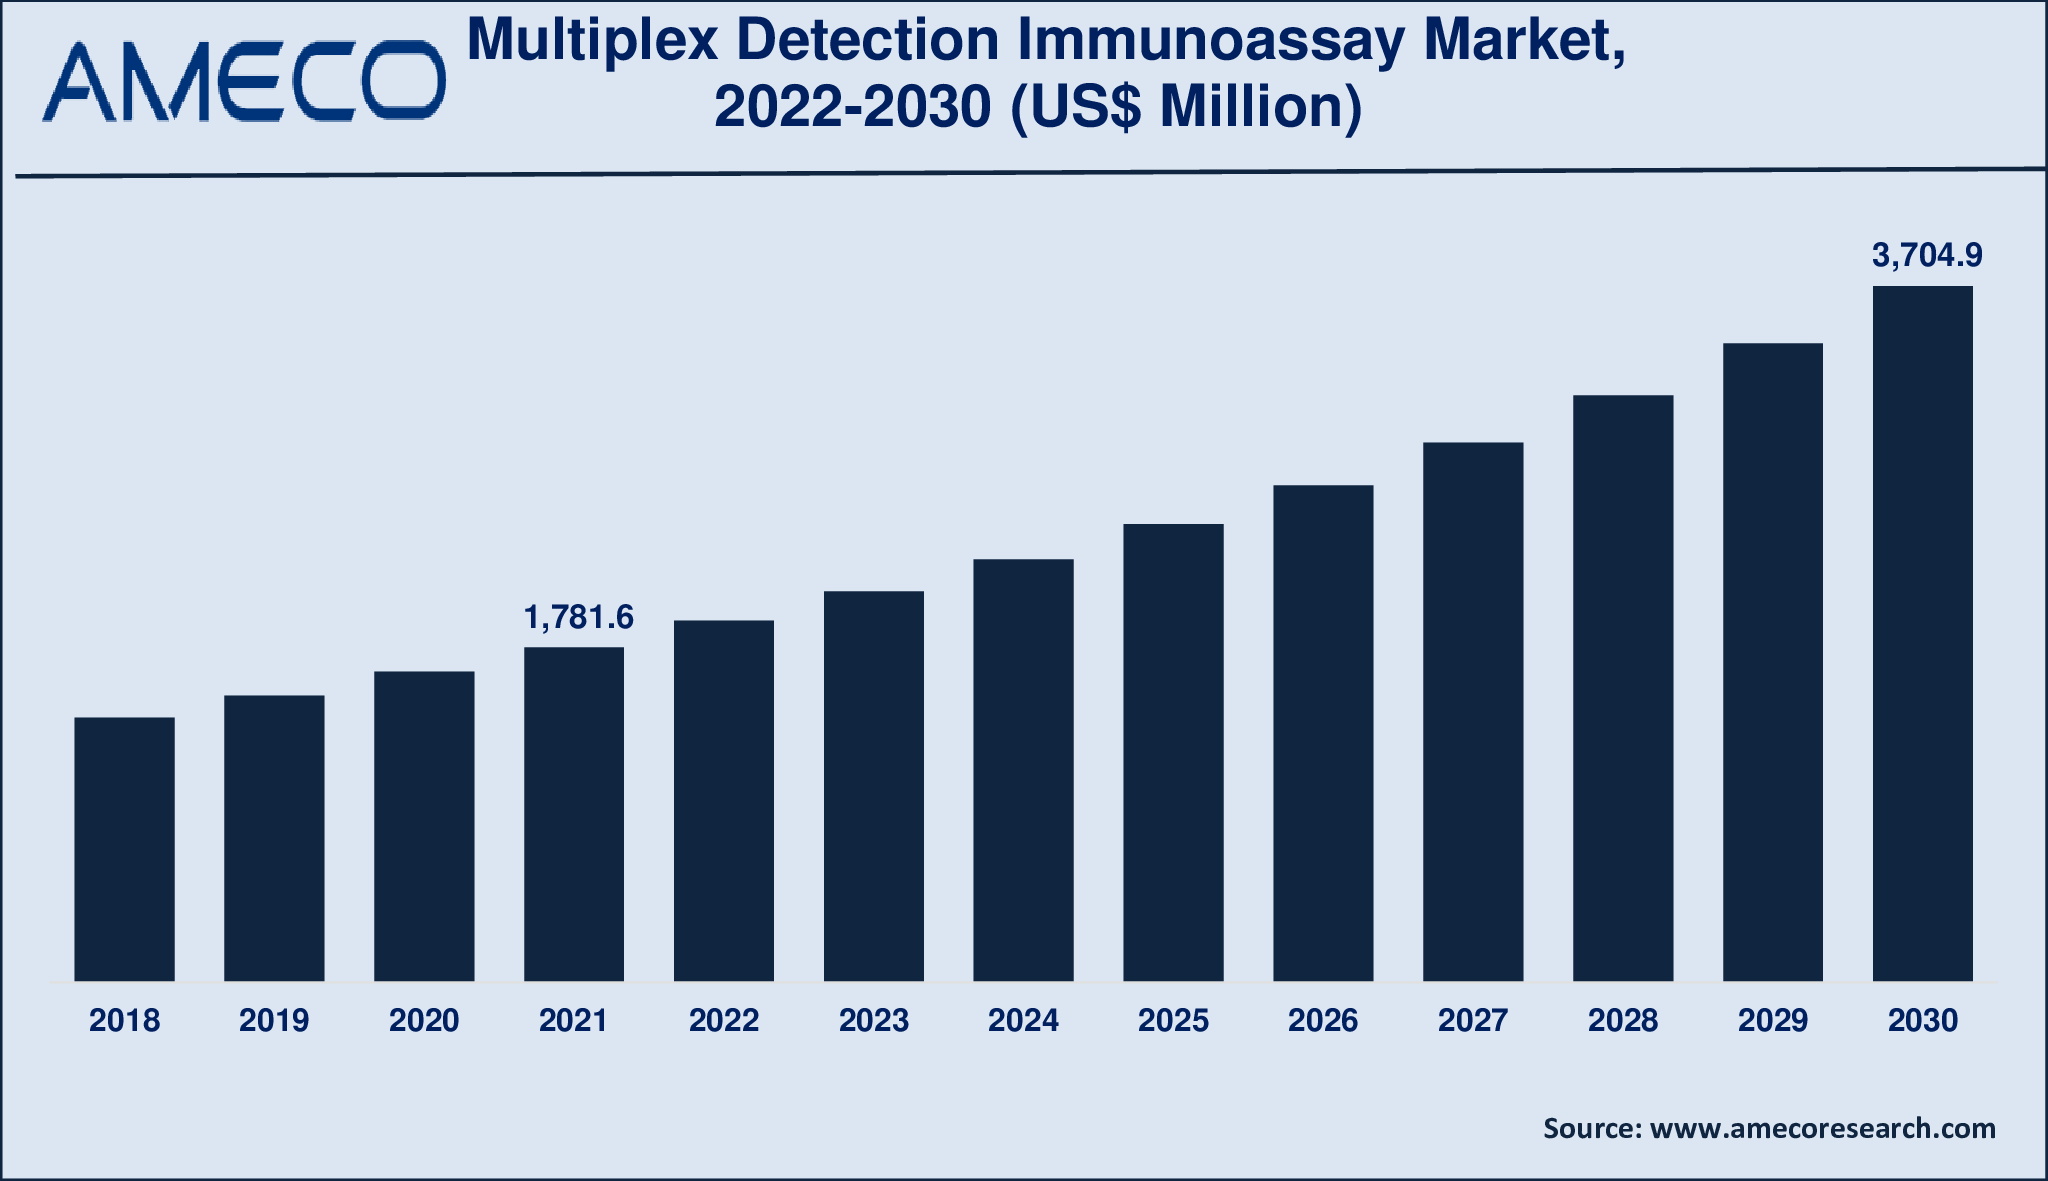 Multiplex Detection Immunoassay Market Size, Share, Growth, Trends, and Forecast 2022-2030